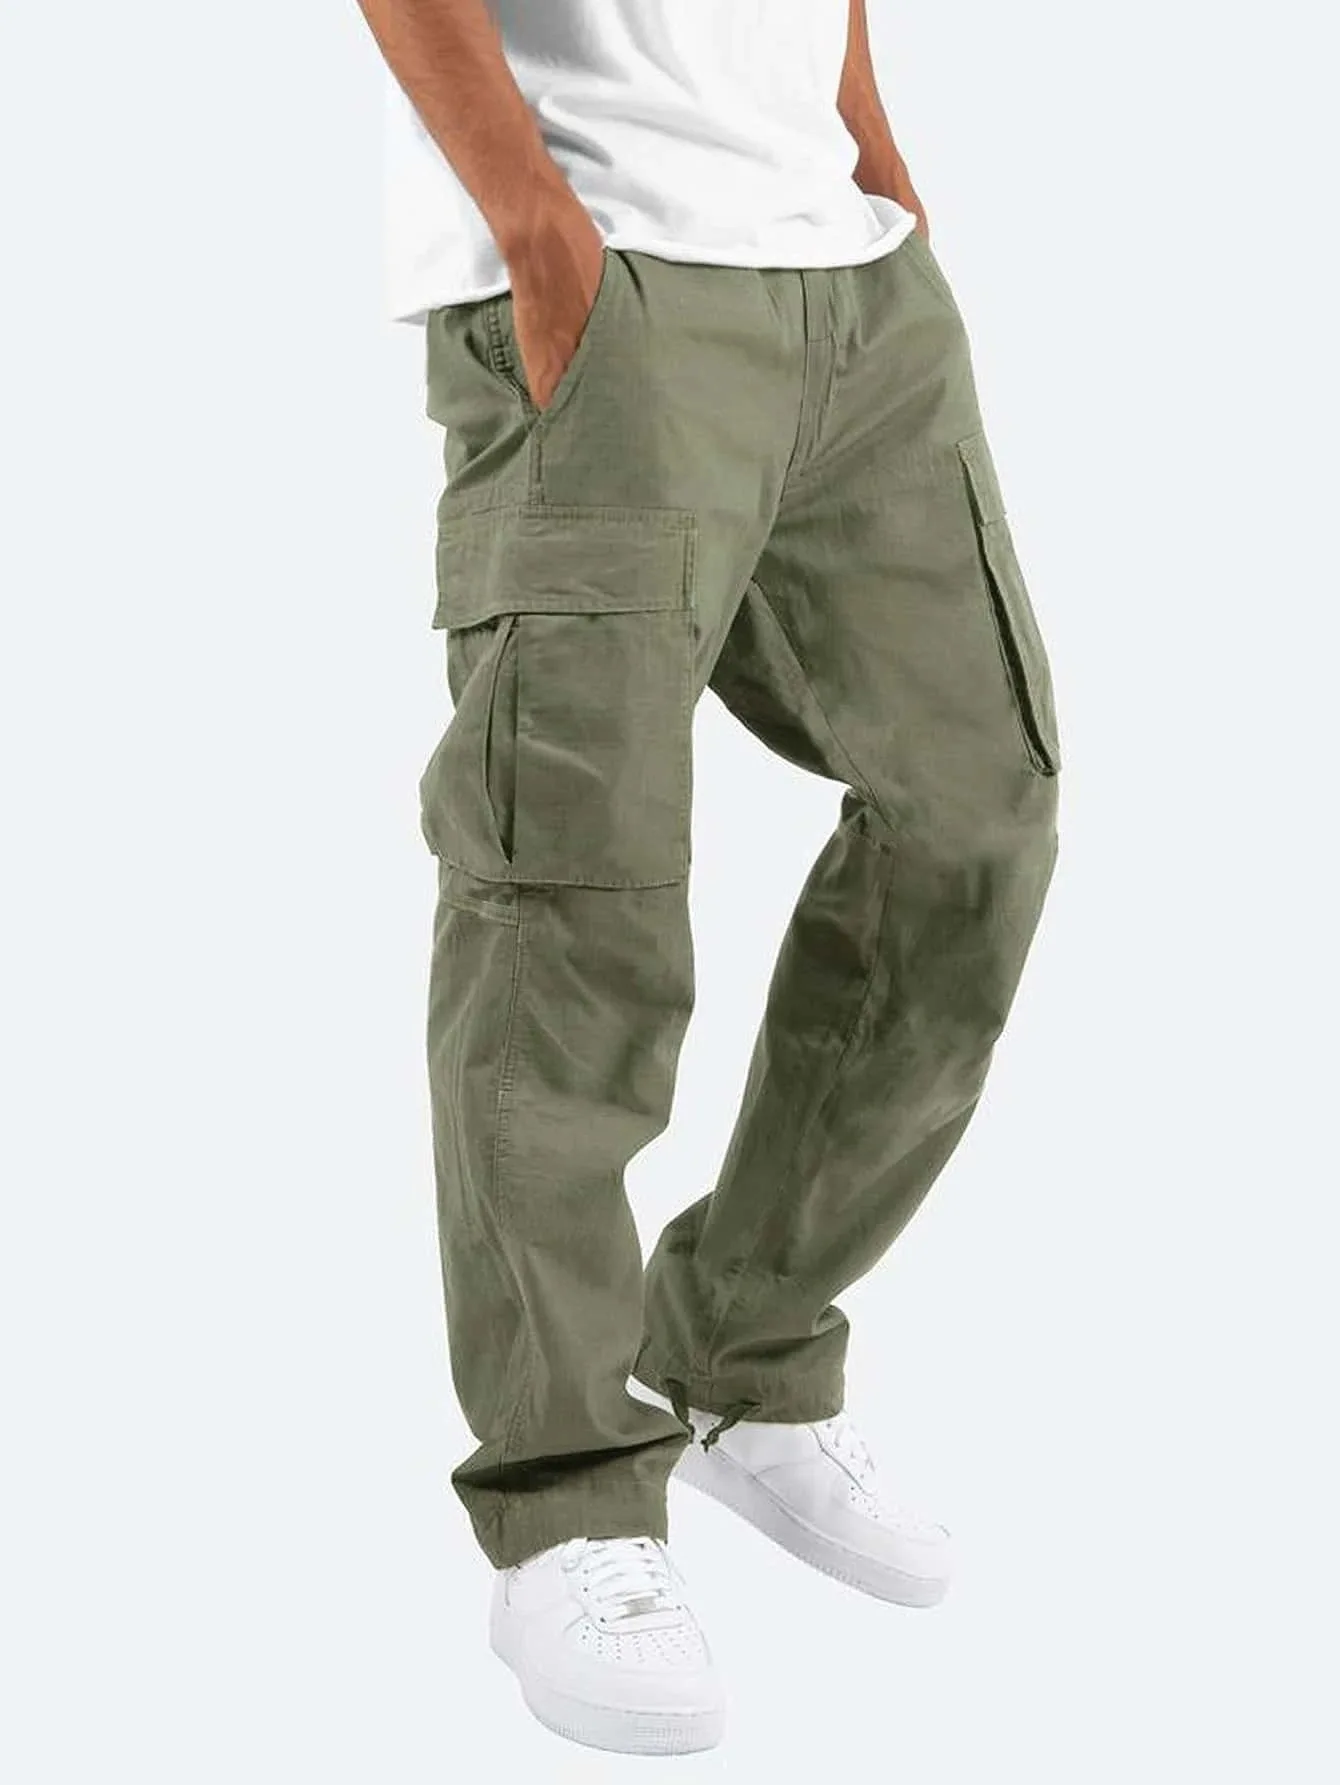 2023 New Summer Multi-Pockets Men's Cargo Pants Casual Slim Fit Joggers Fashion Drawstring Cotton Work Trousers Male Streetwear